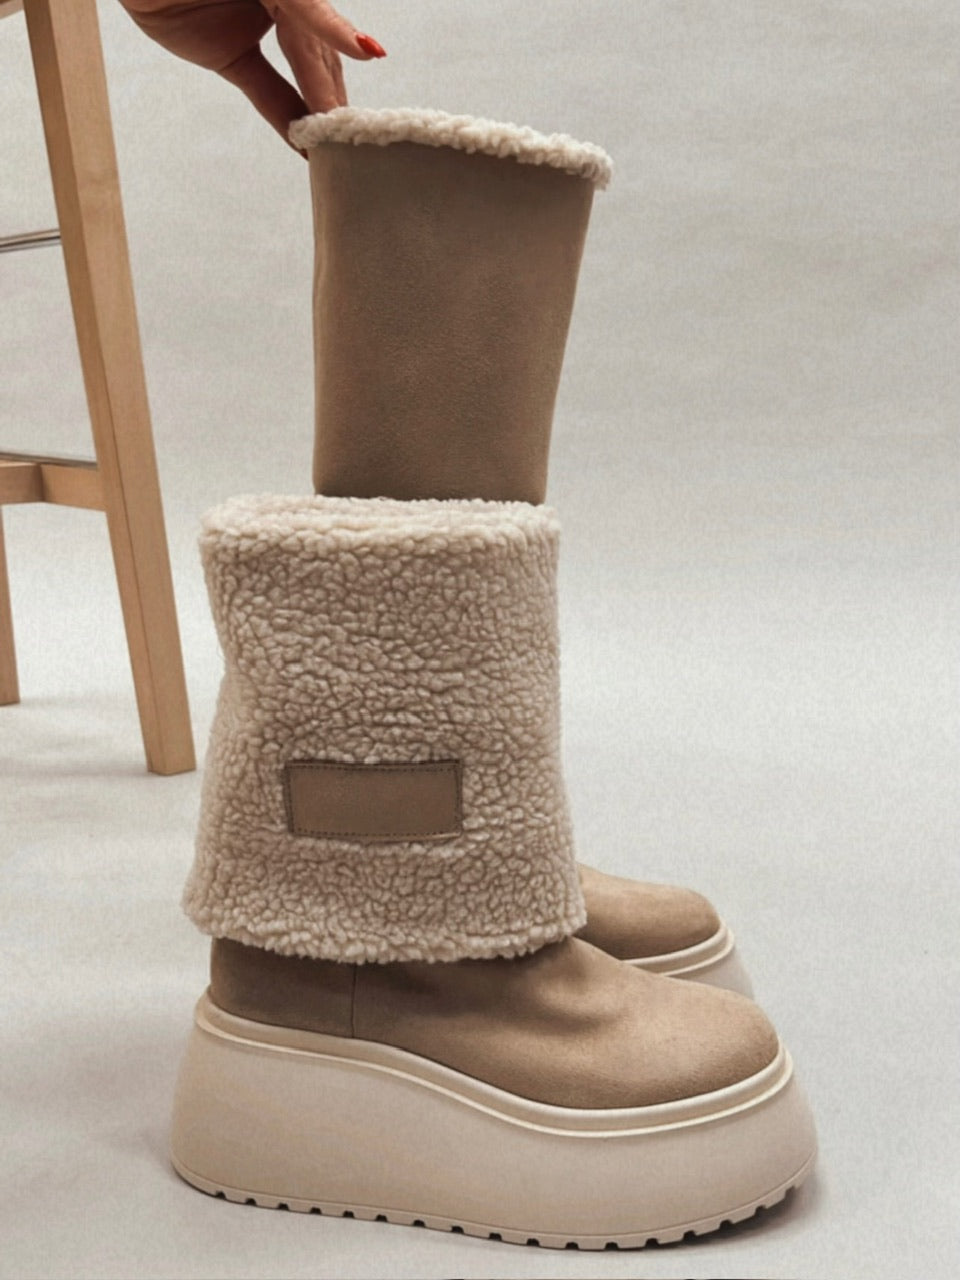 Comfortable and versatile mid-calf fur boots